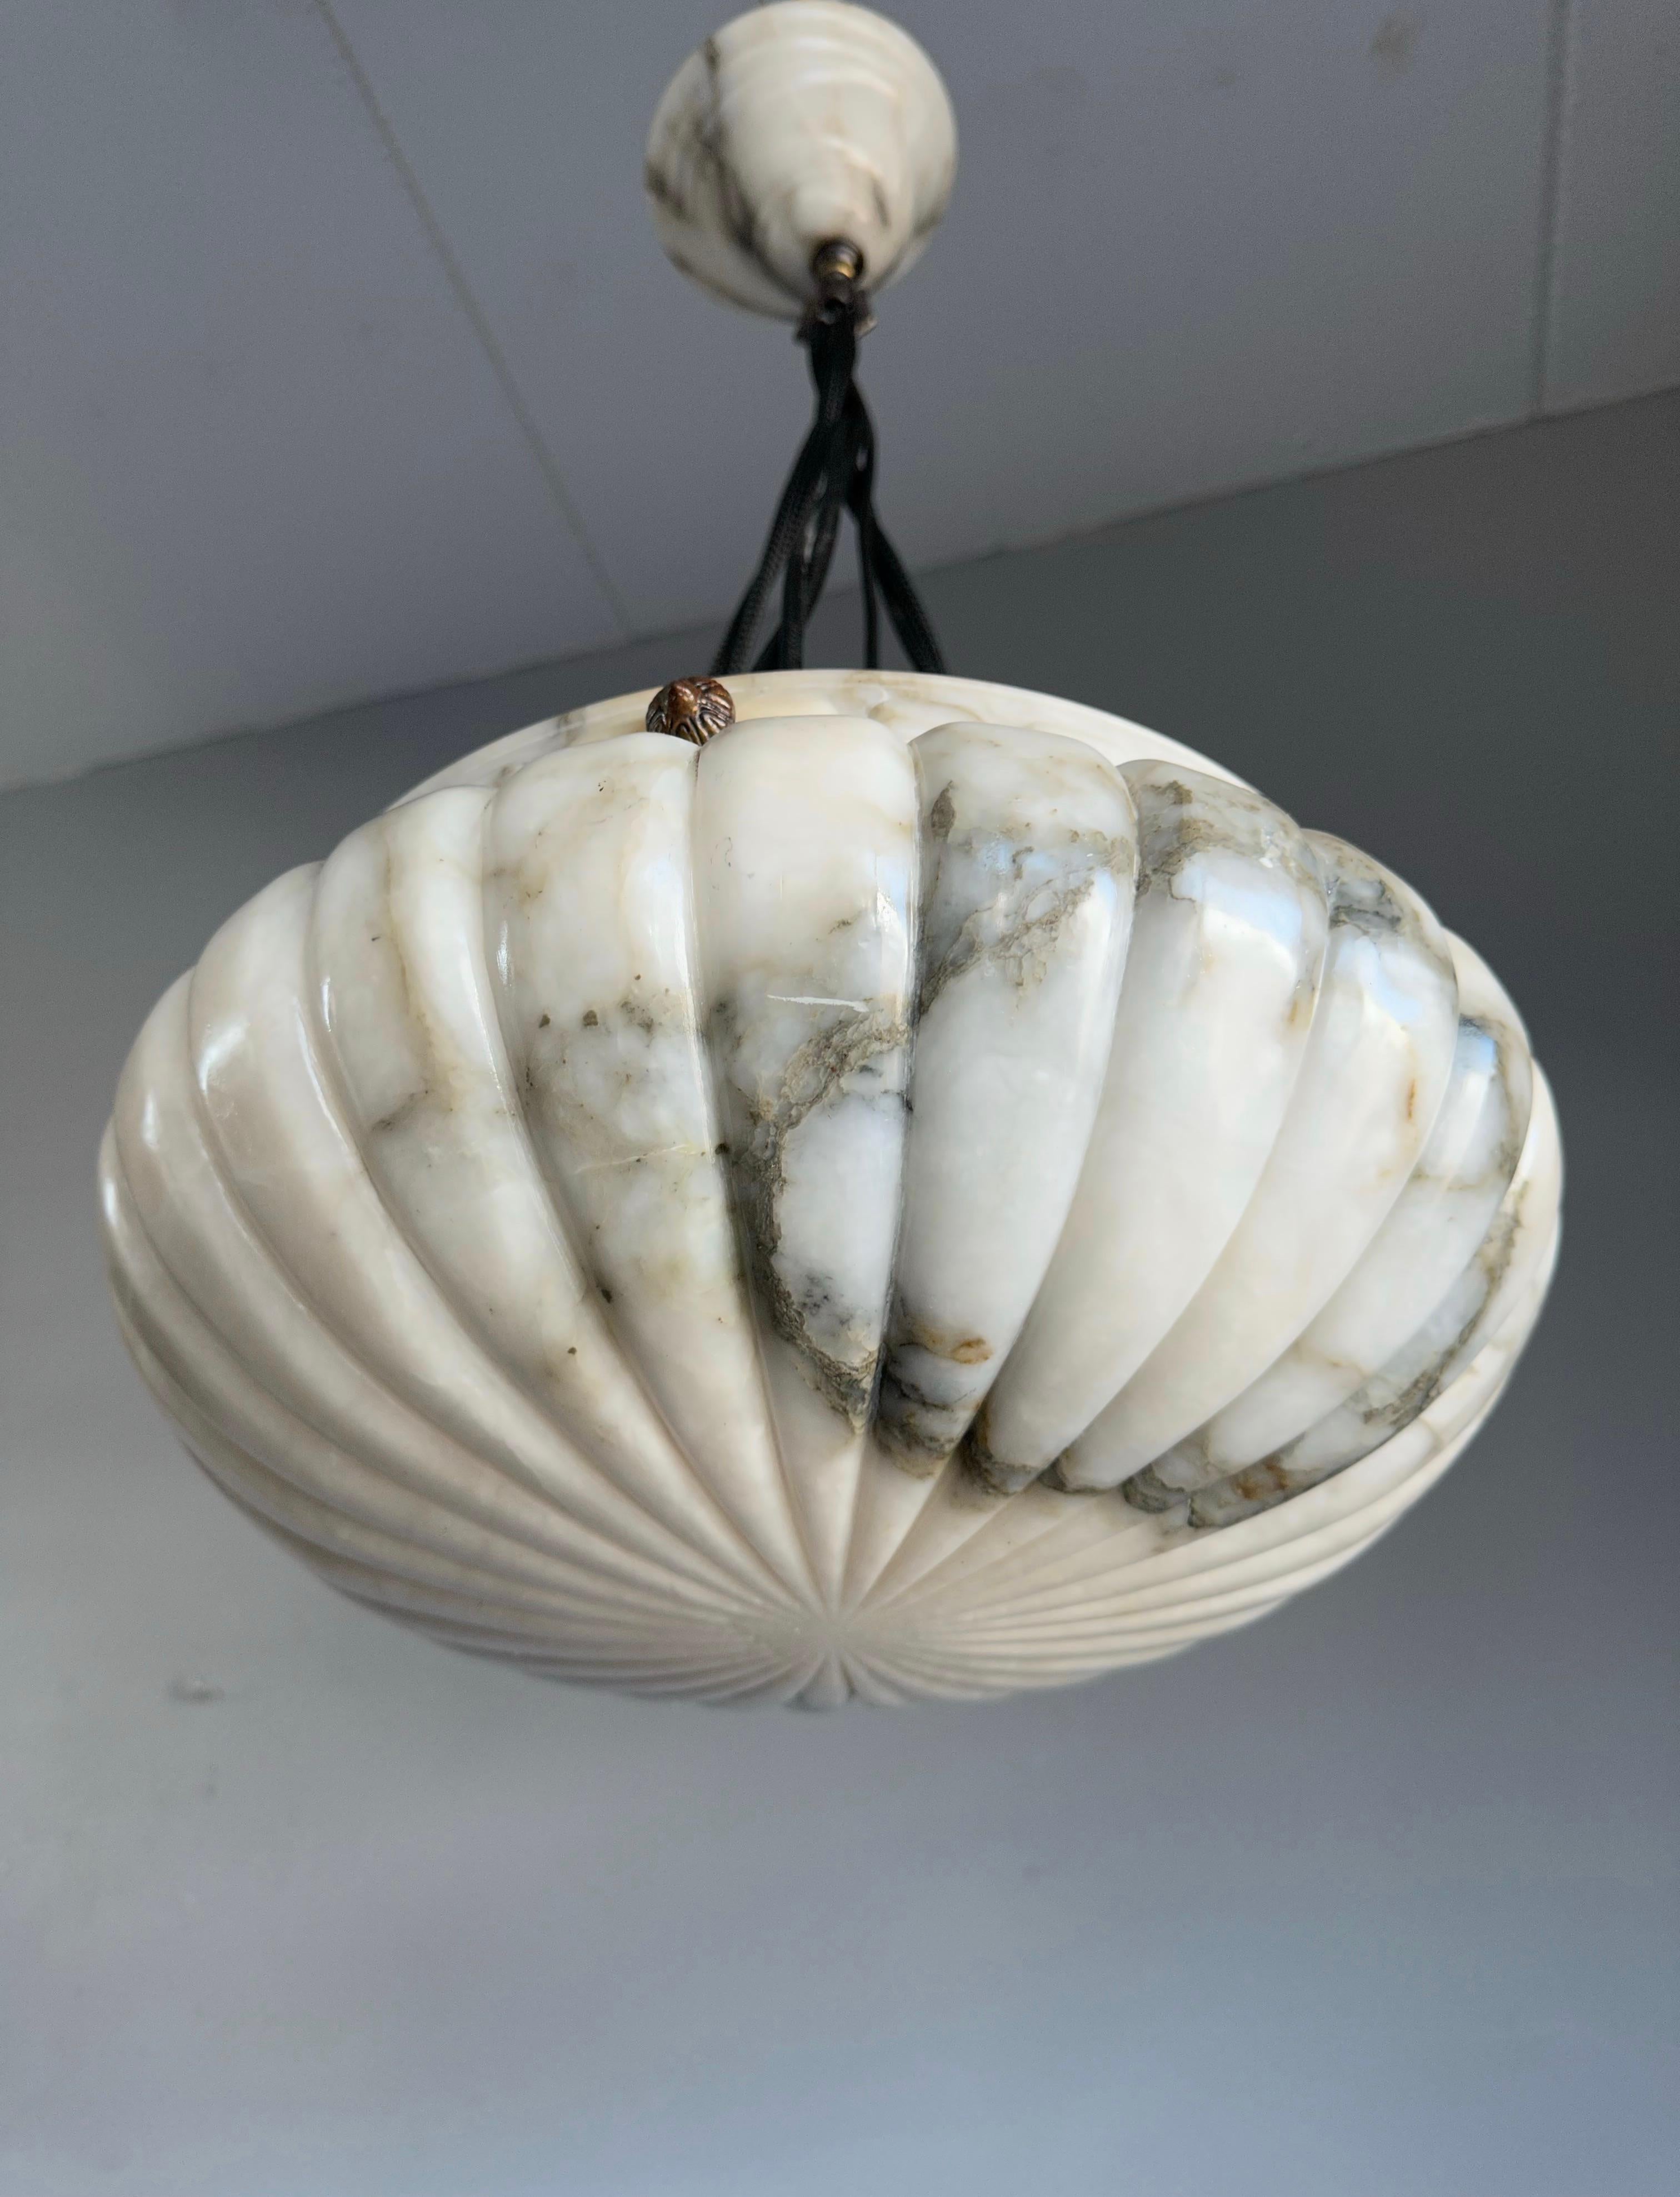 Top class light fixture with a stunning, deeply hand carved, alabaster plafonnier shade.

Thanks to its unique design, its good size, and its truly excellent condition this alabaster chandelier will light up both your days and evenings. Apart from